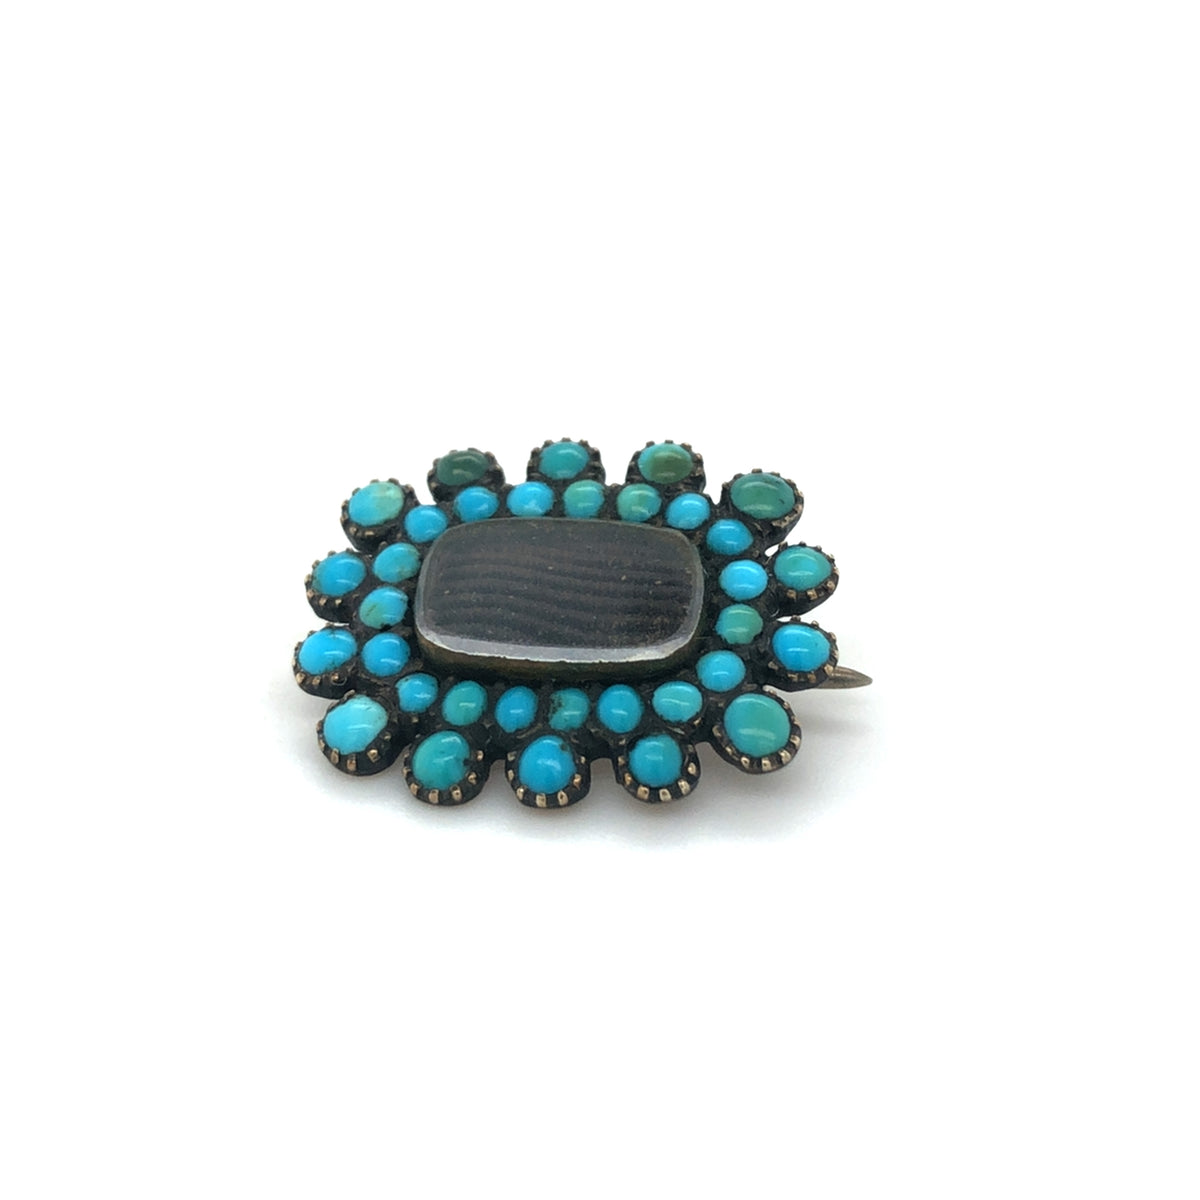 Antique Turquoise Brooch